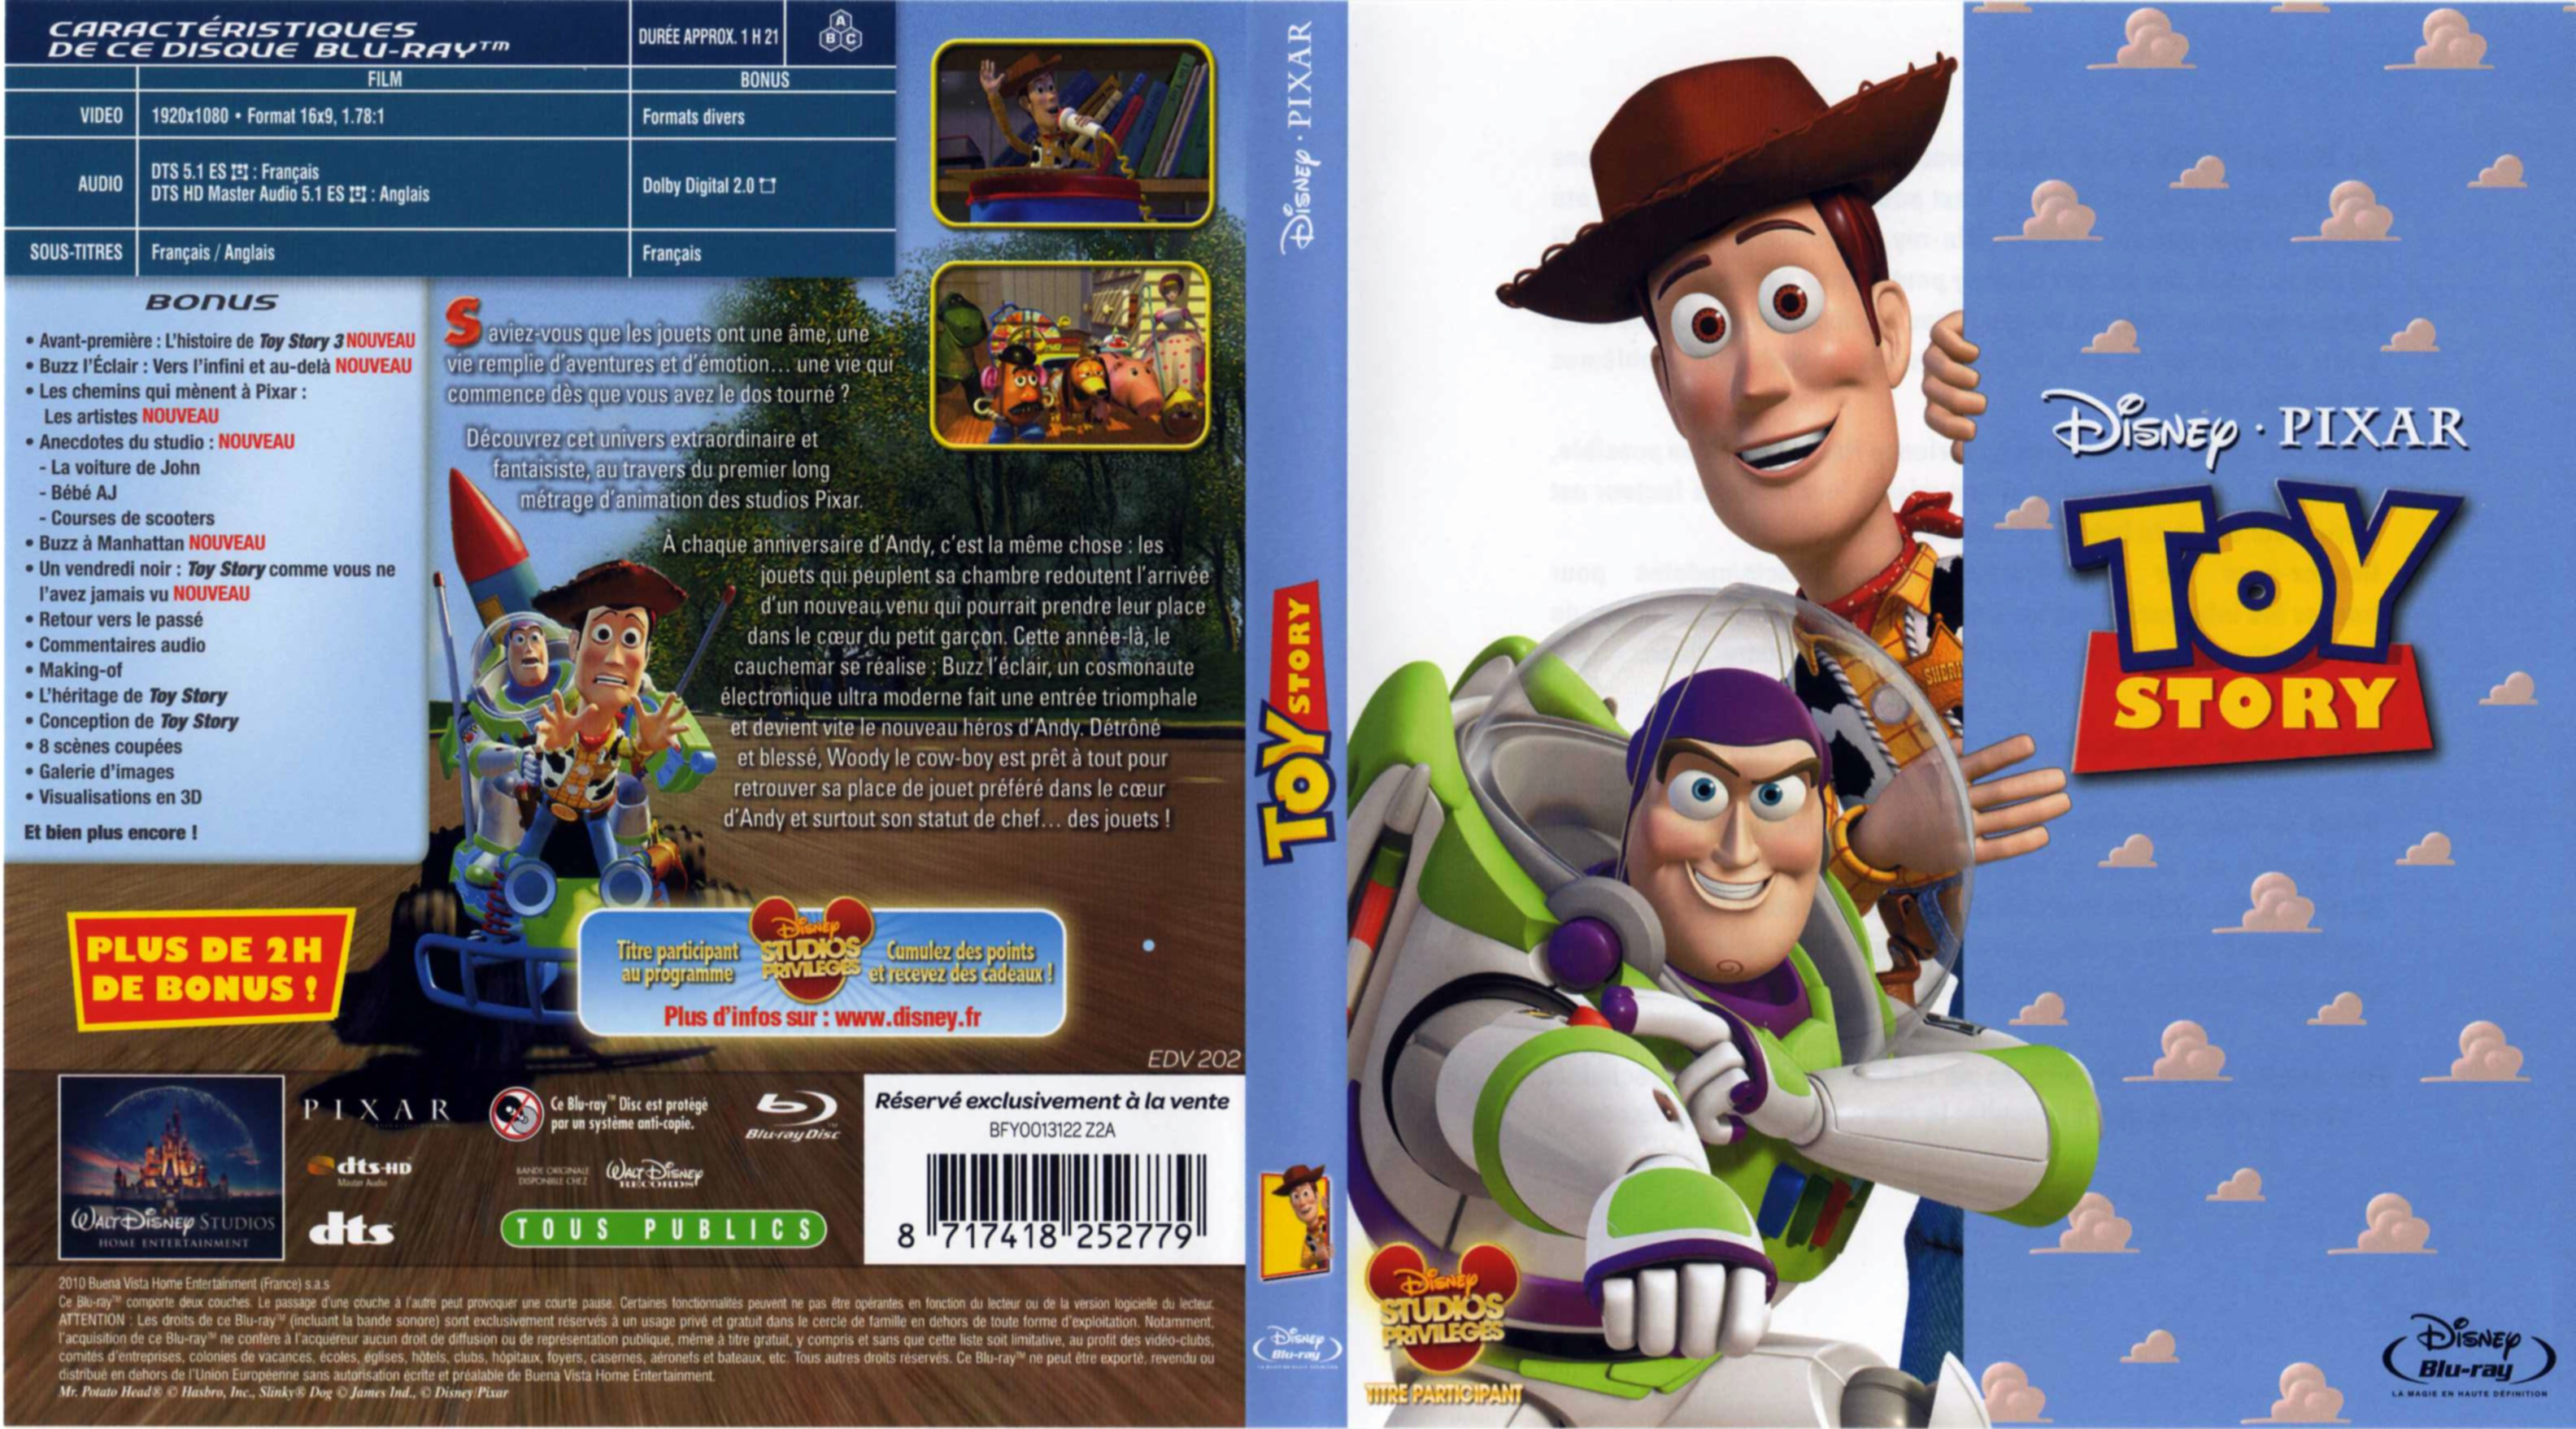 Jaquette DVD Toy Story (BLU-RAY)